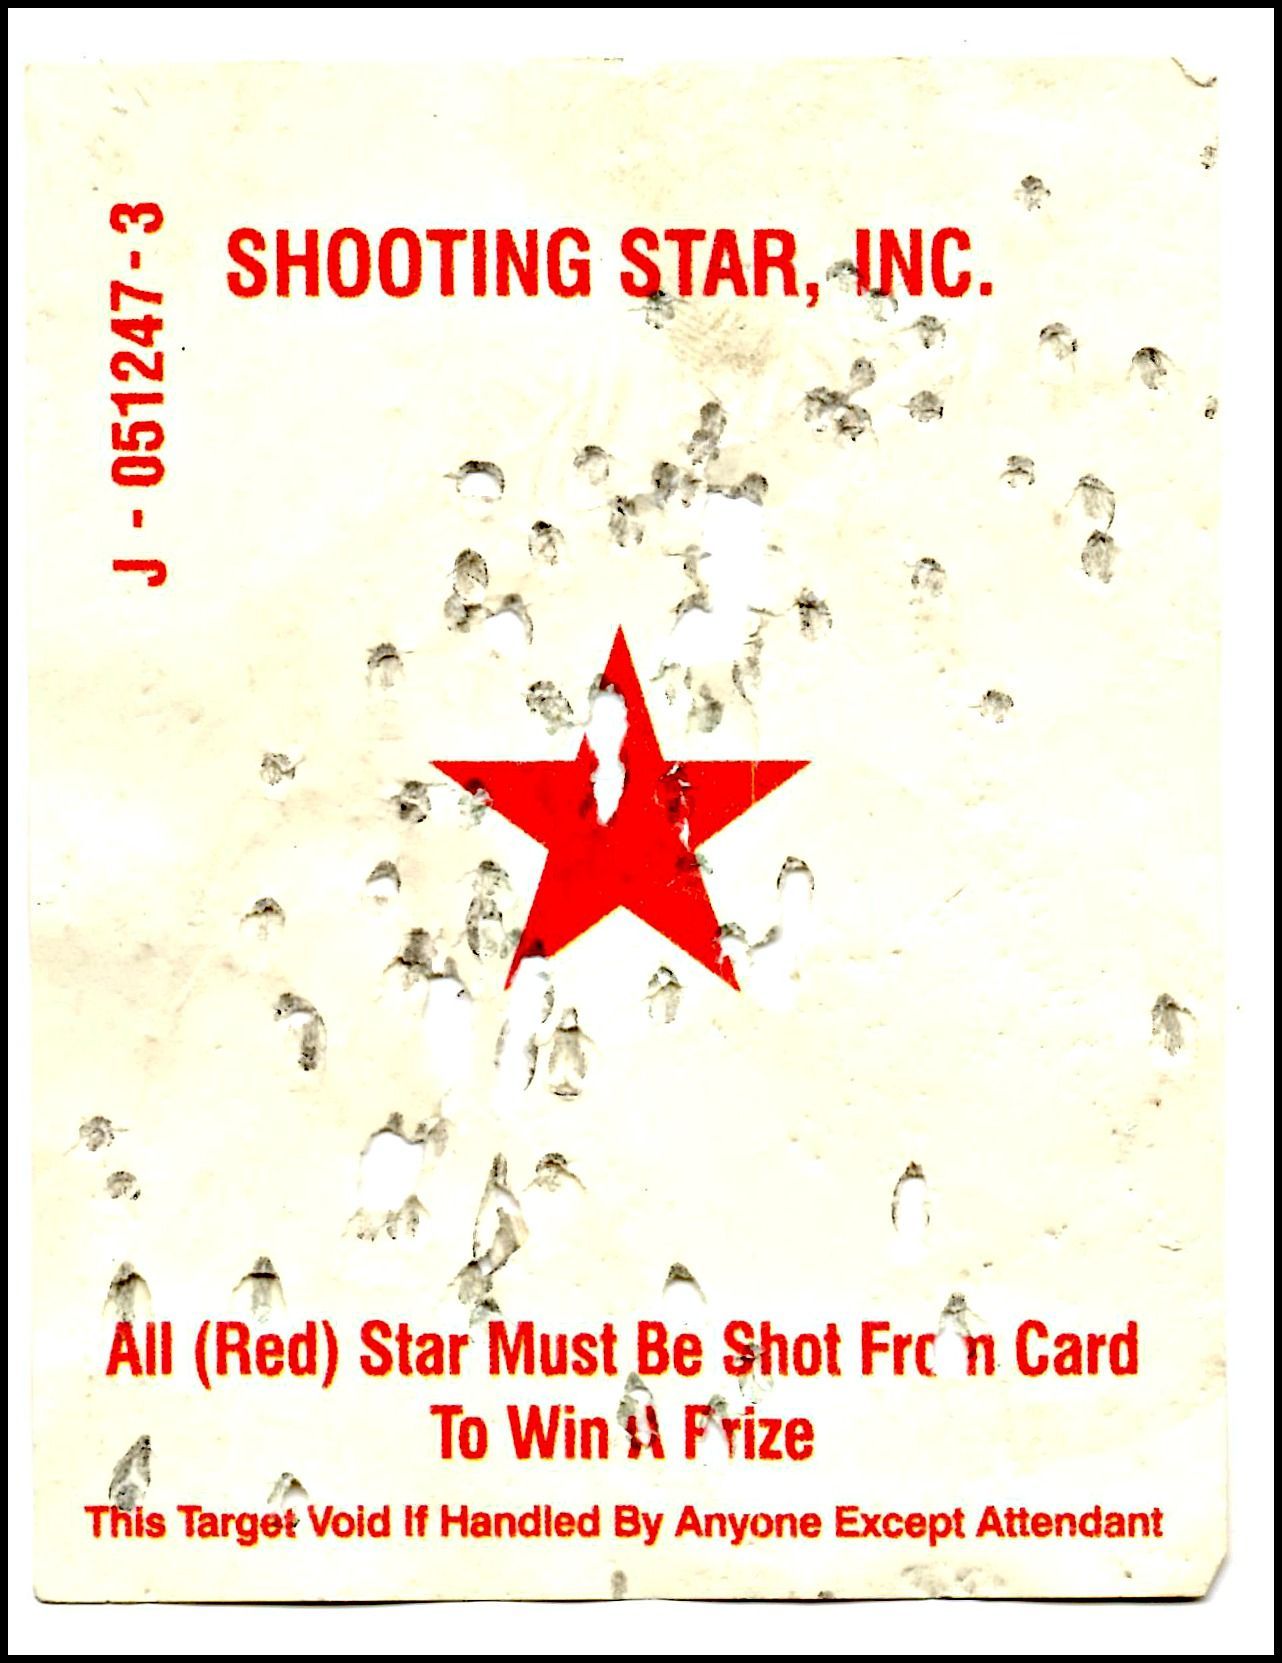 shoot the star carnival game - Google Search | Shooting games ...